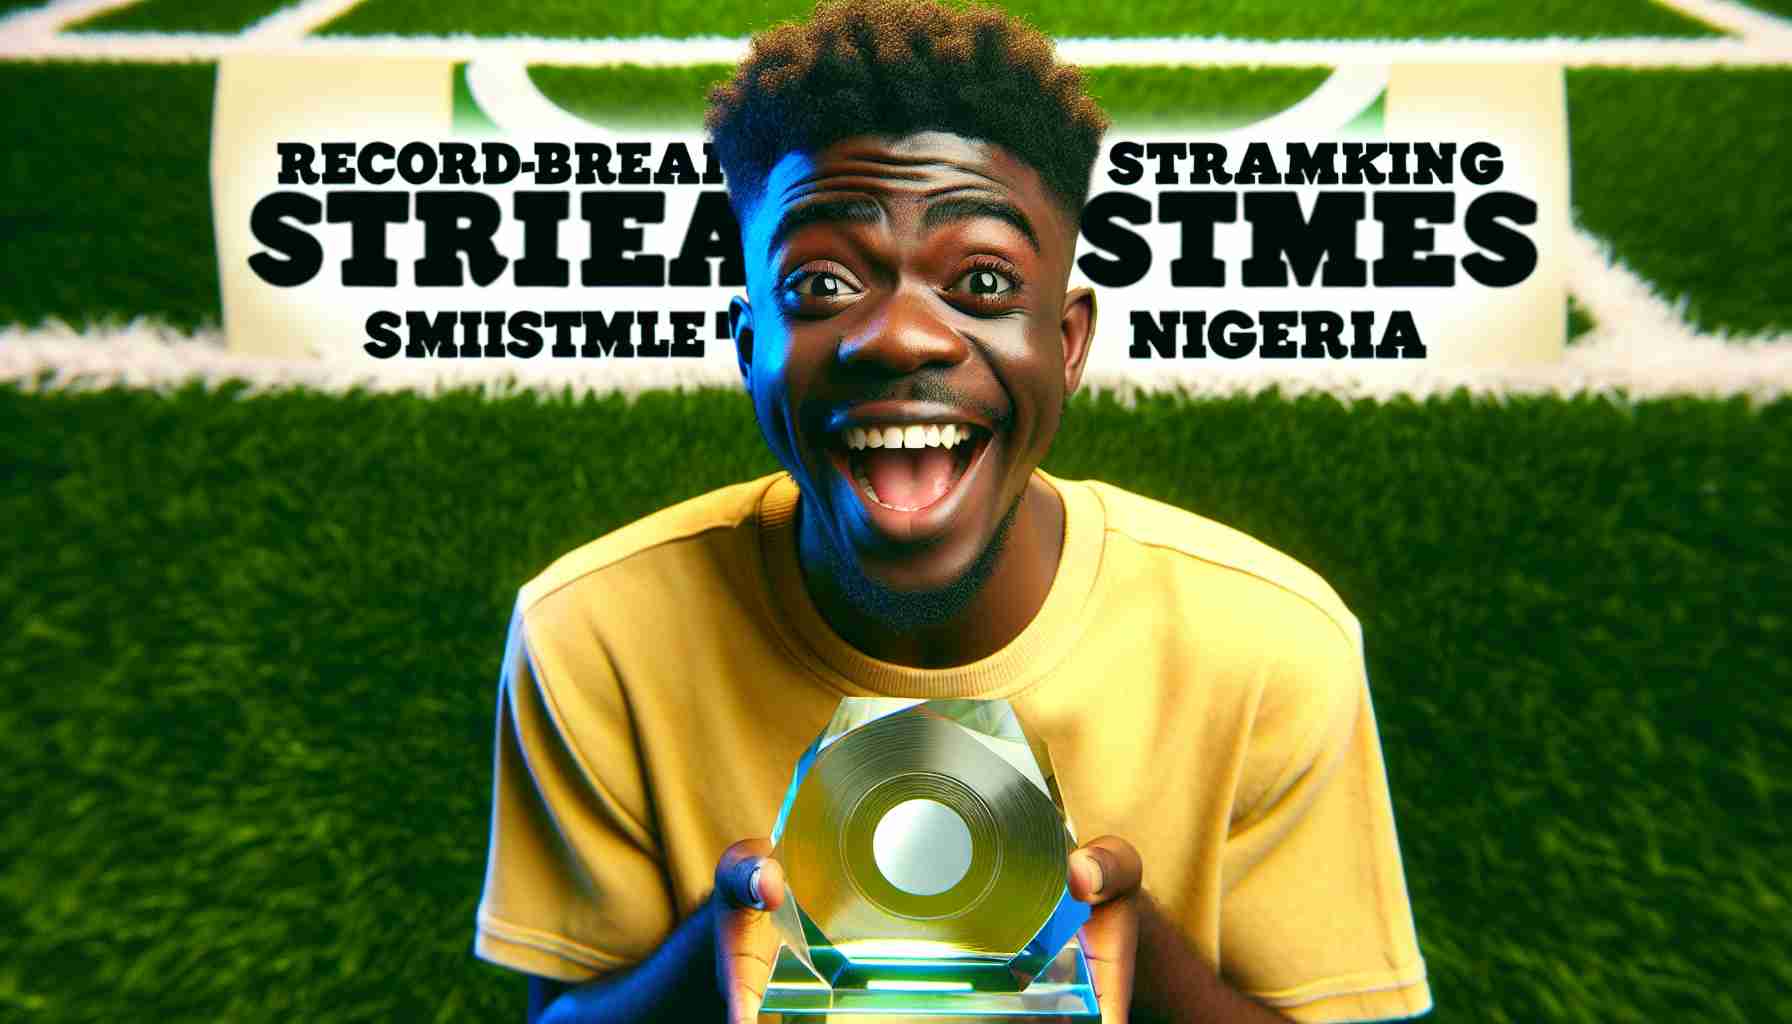 A HD photo headlines highlighting Record-Breaking Streaming Milestone achievement in Nigeria. In the photo, a young Black male artist with short curly hair, wearing a yellow short-sleeved shirt, excitement is evident on his face. He is holding a clear glass award, reflecting his recent accomplishment. The football pitch serves as the backdrop, indicating his love for the sport apart from music. The wordings 'Record-Breaking Streaming Milestone in Nigeria' are displayed across the bottom of the image in bold letters.